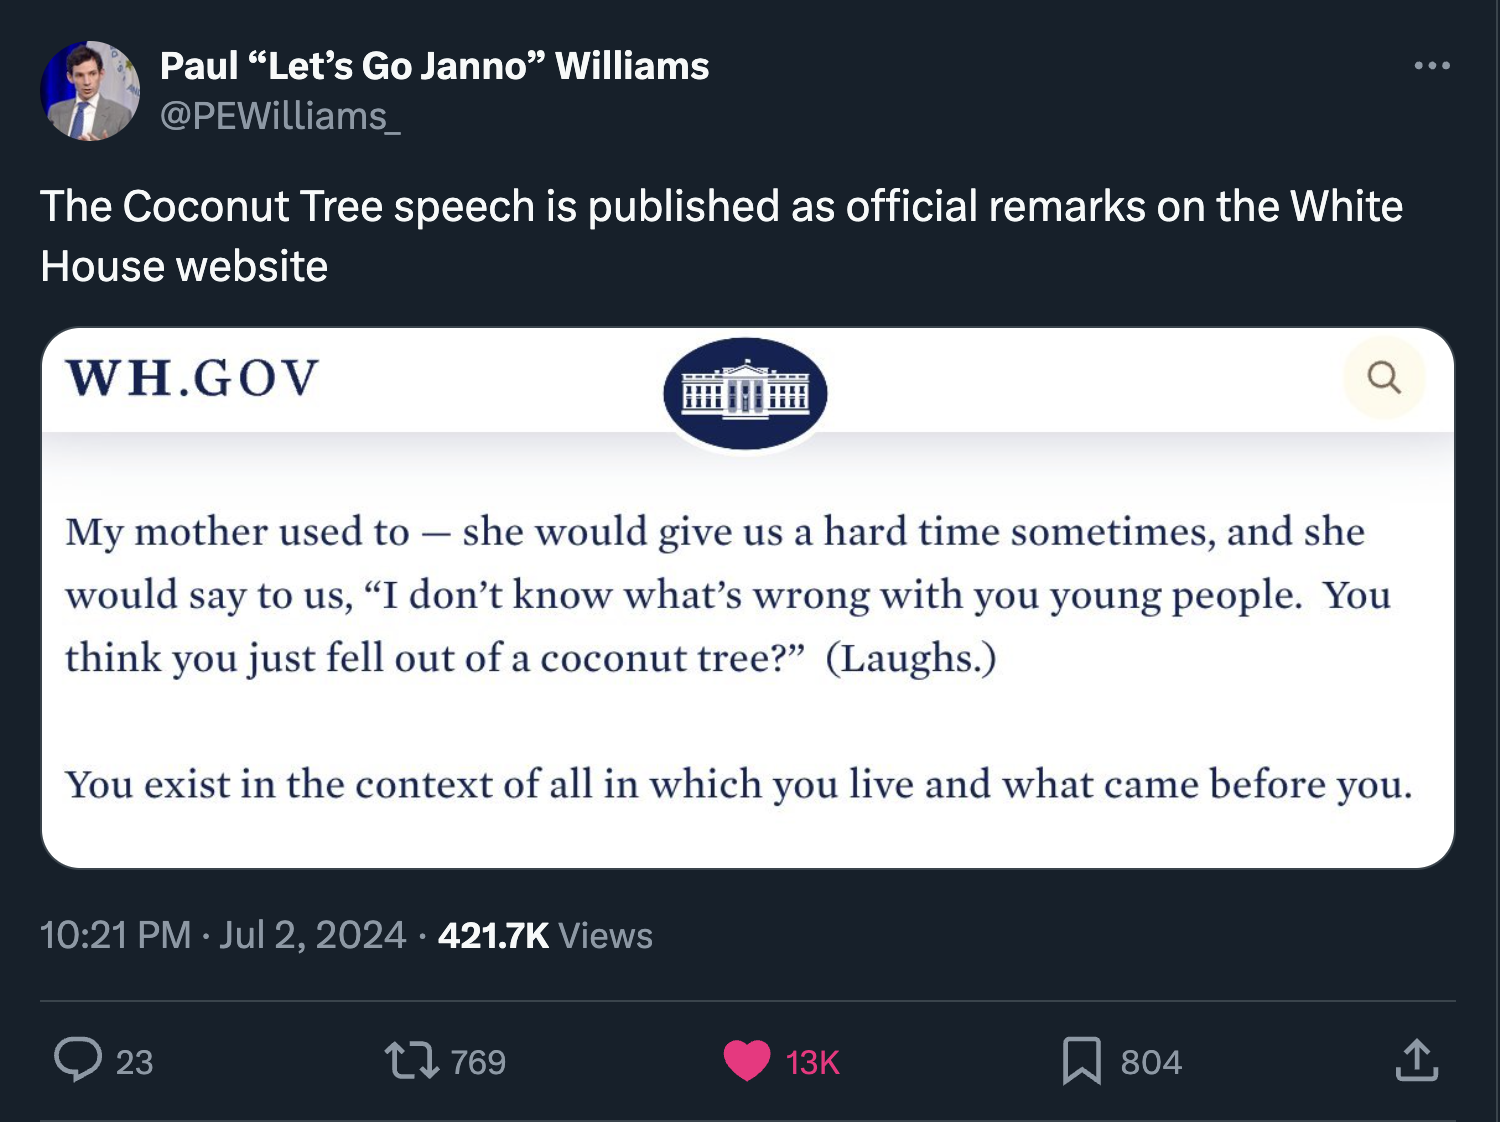 screenshot - Paul "Let's Go Janno" Williams The Coconut Tree speech is published as official remarks on the White House website Wh.Gov My mother used to she would give us a hard time sometimes, and she would say to us, "I don't know what's wrong with you 